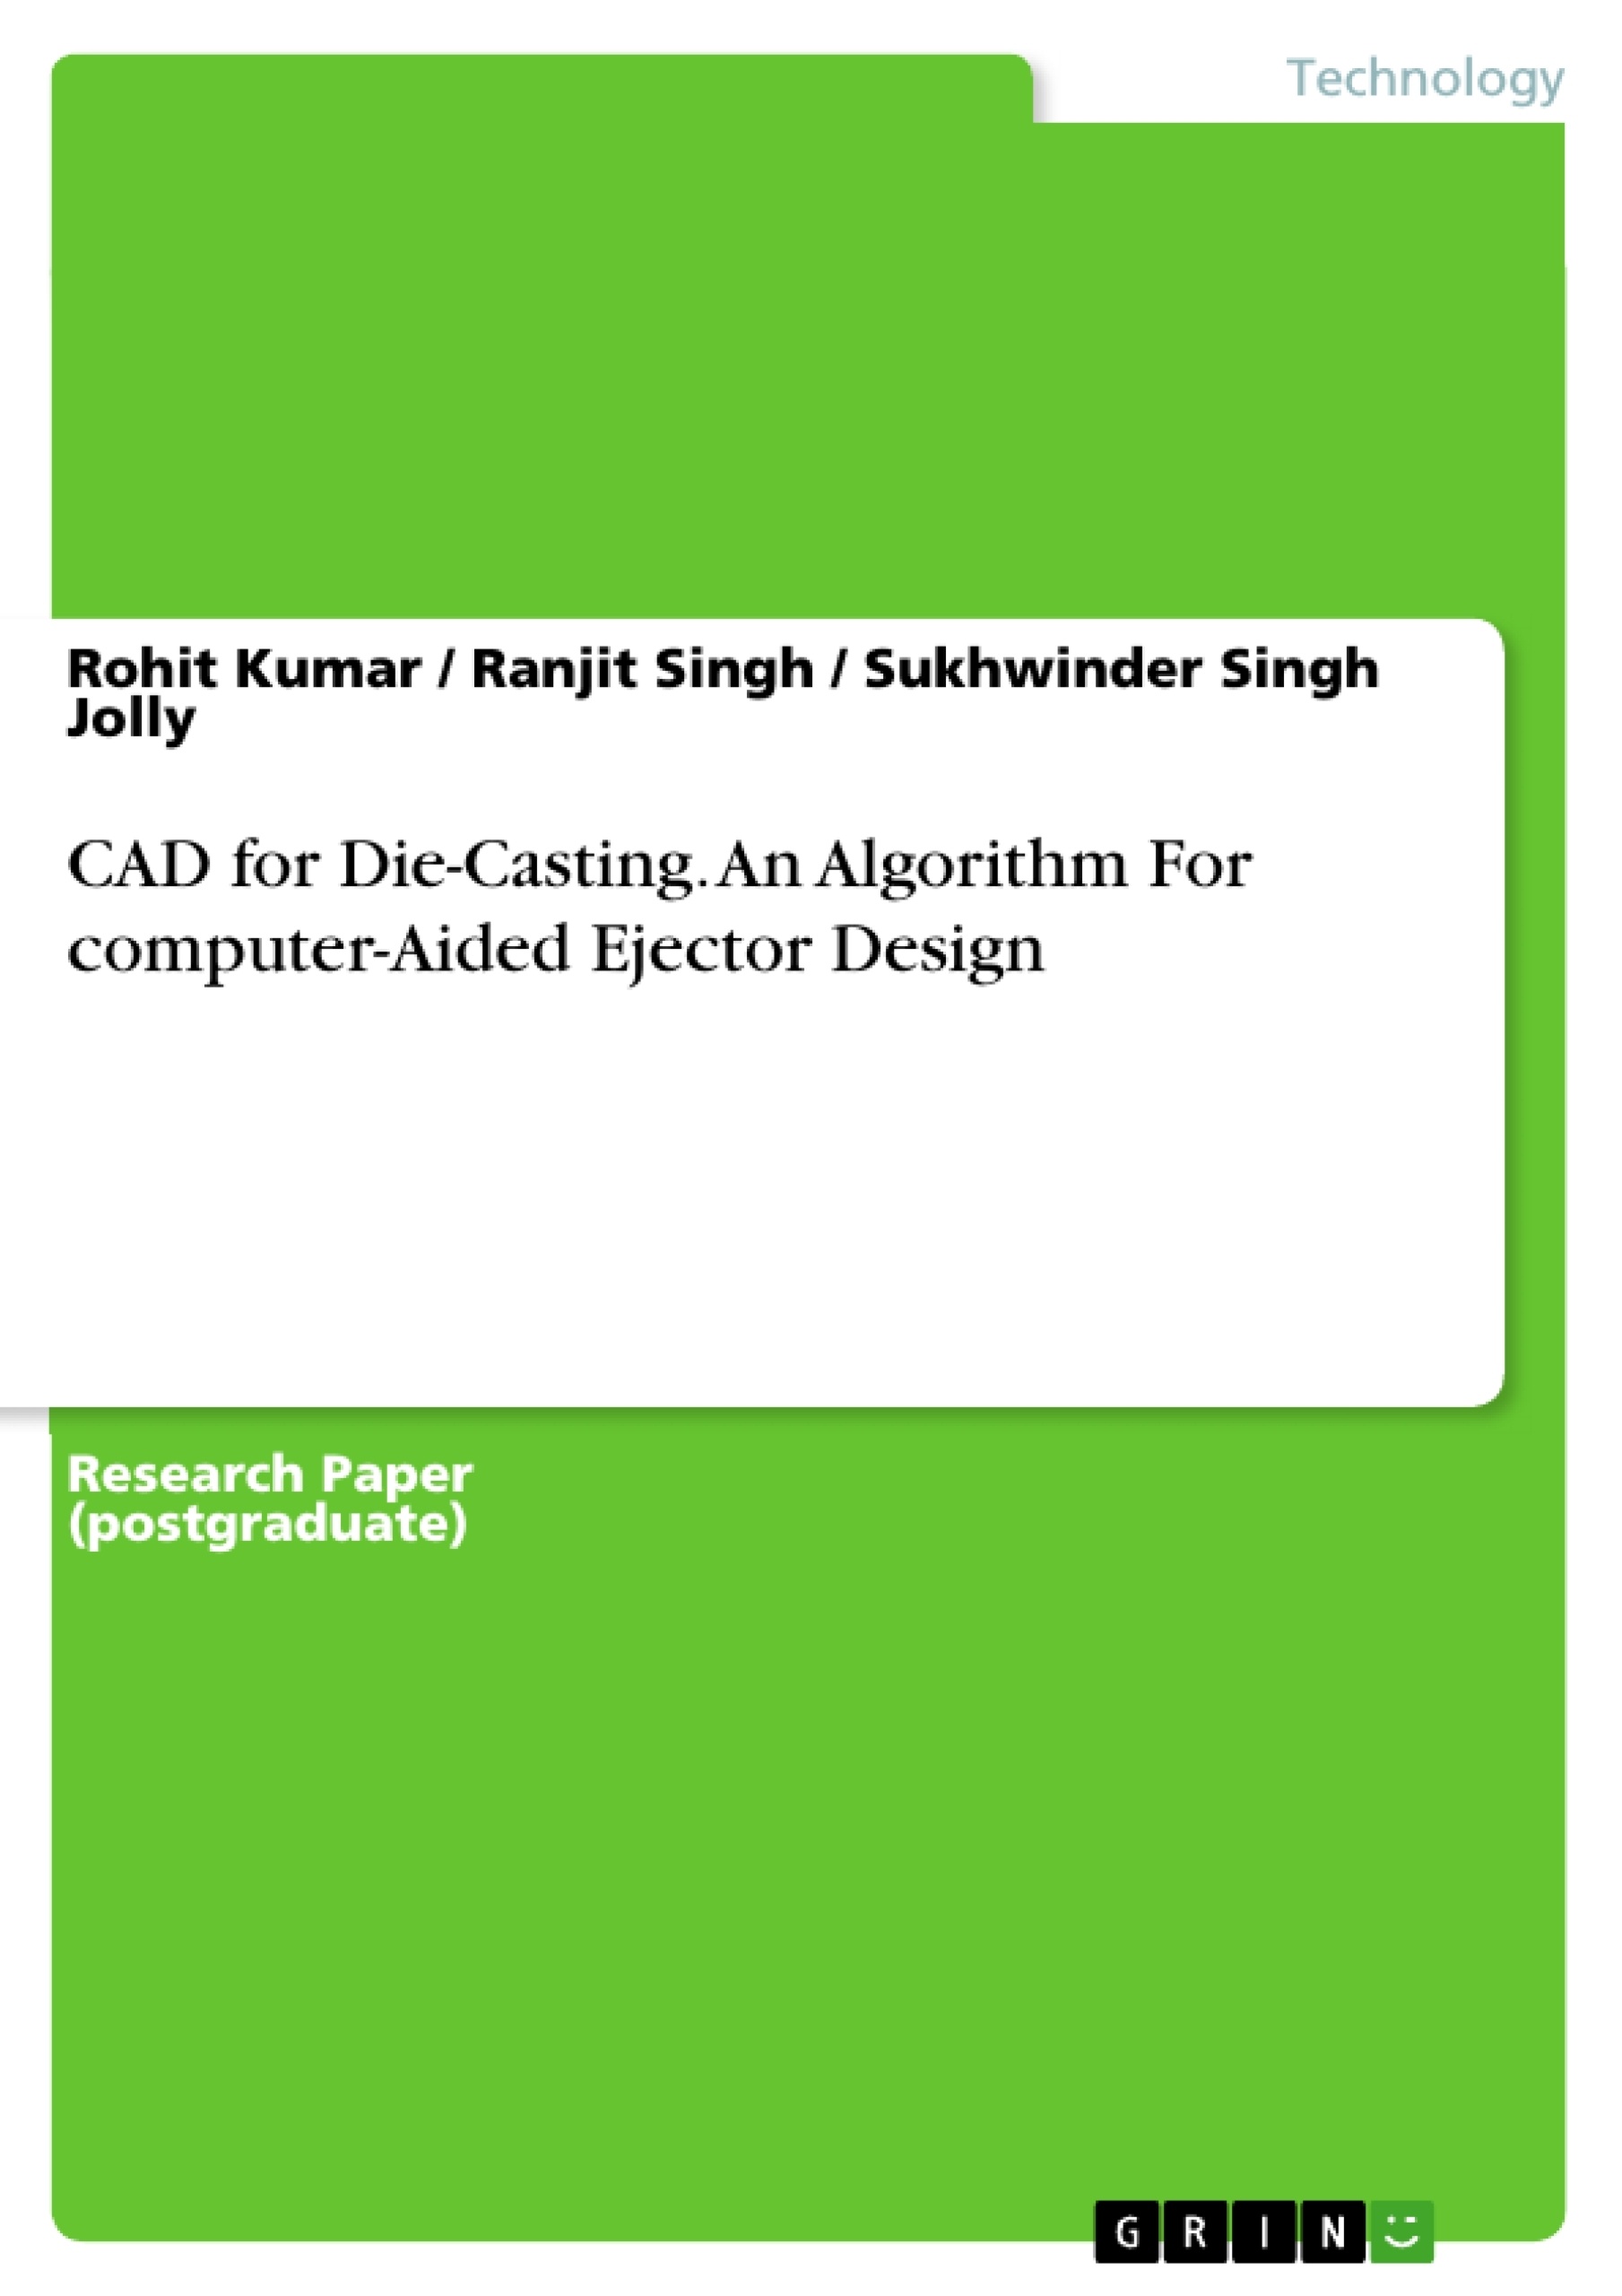 Title: CAD for Die-Casting. An Algorithm For computer-Aided Ejector Design